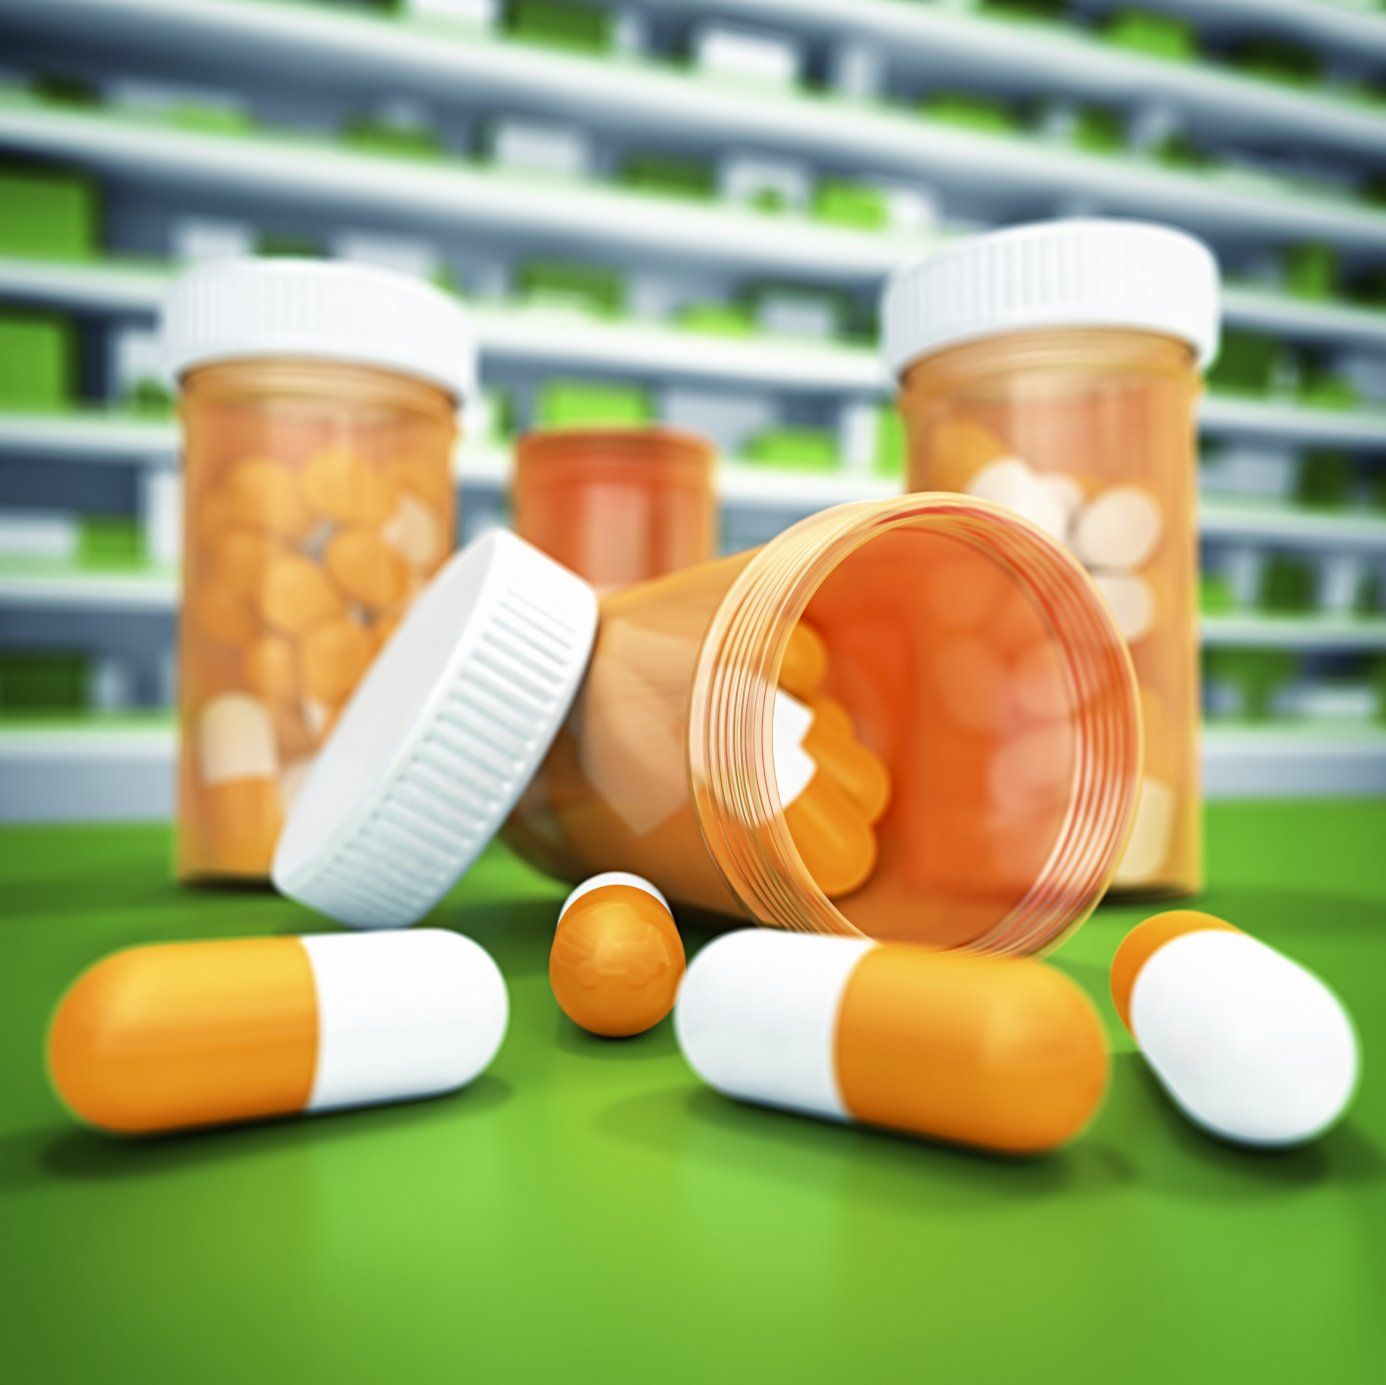 Two tablet containers with white and orange capsules in foreground